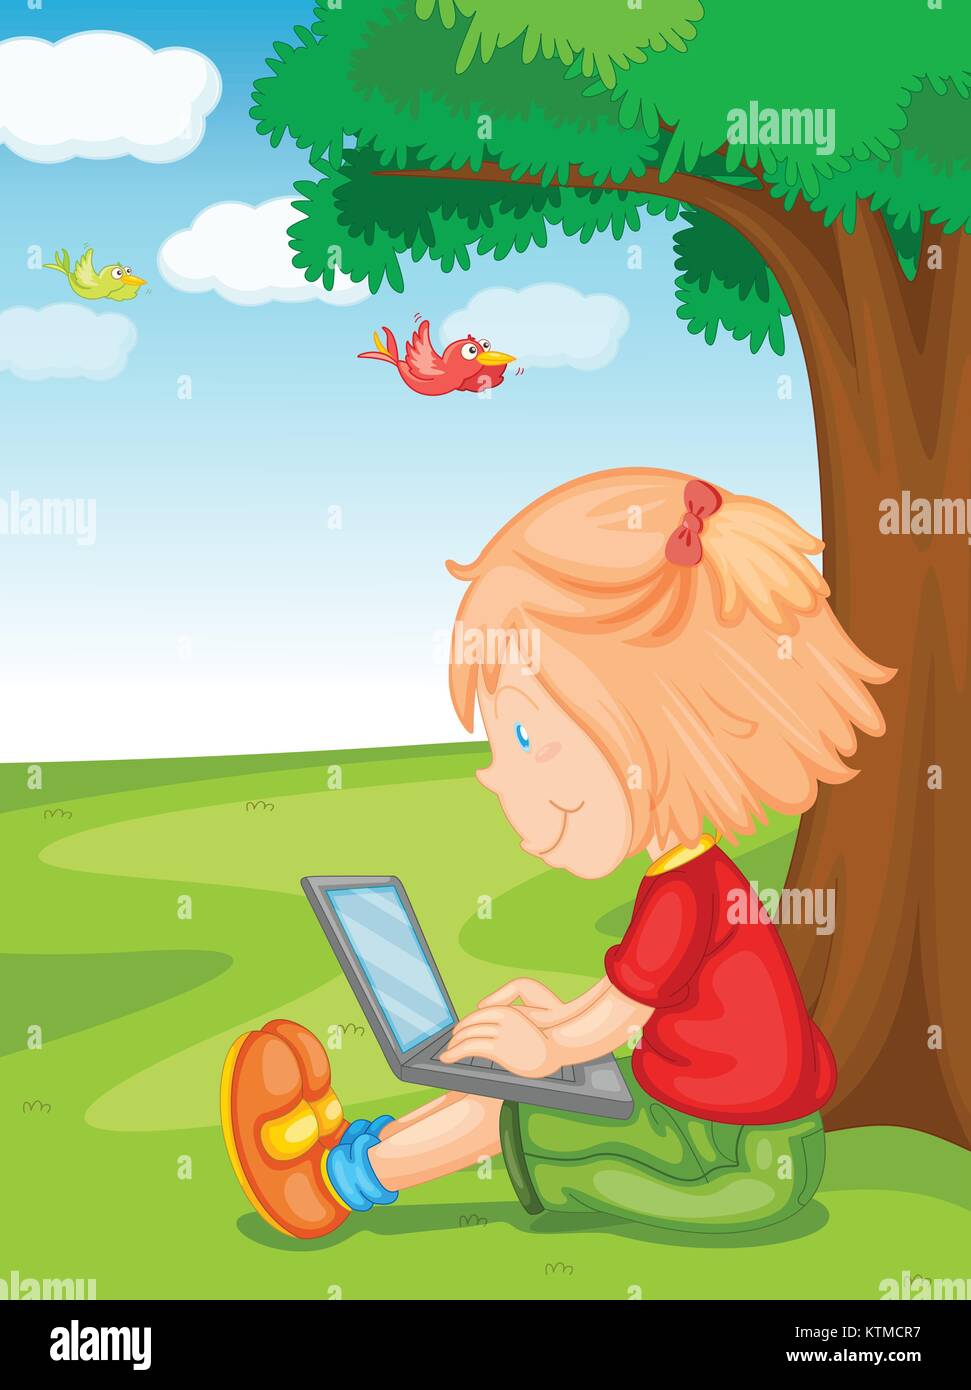 illustration of a girl and laptop under the tree Stock Vector